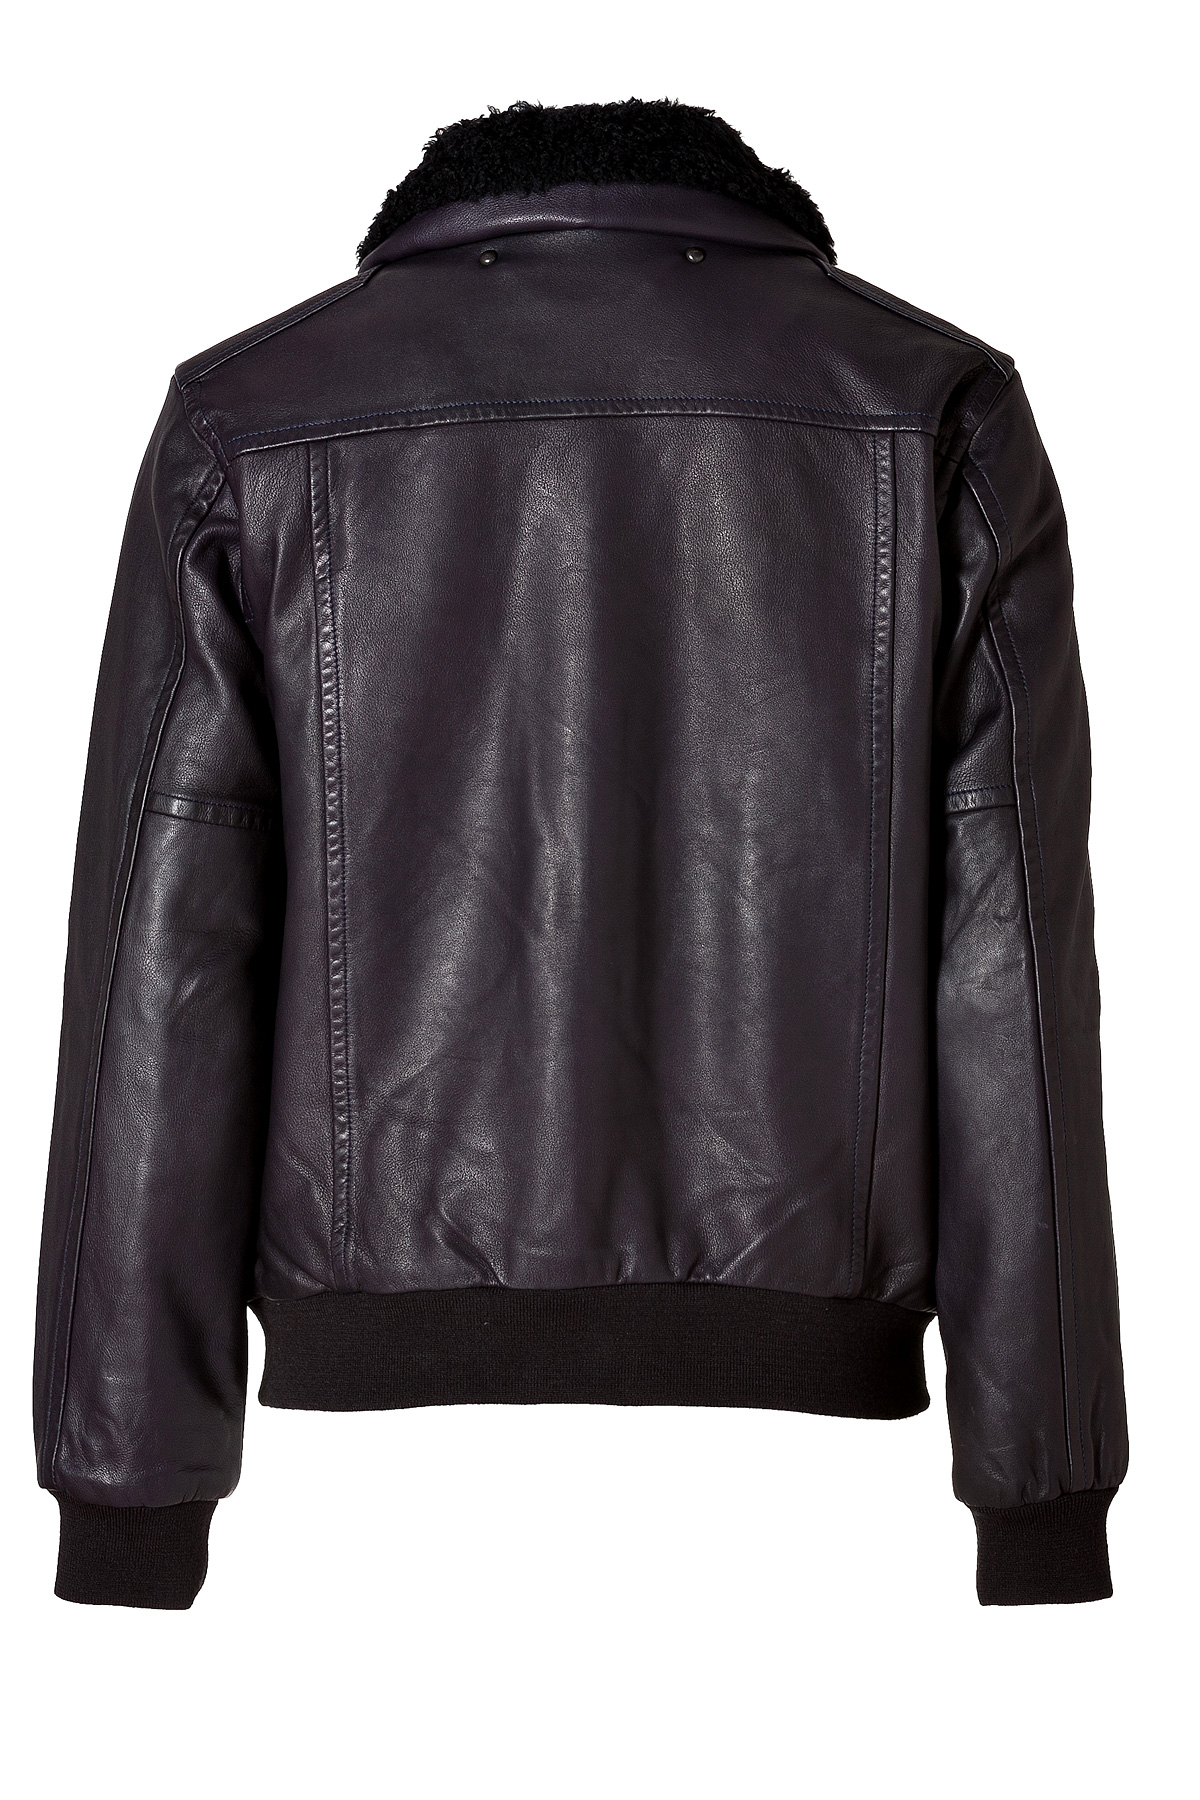 Lyst - Marc By Marc Jacobs Leather Jacket In Twilight Navy in Blue for Men